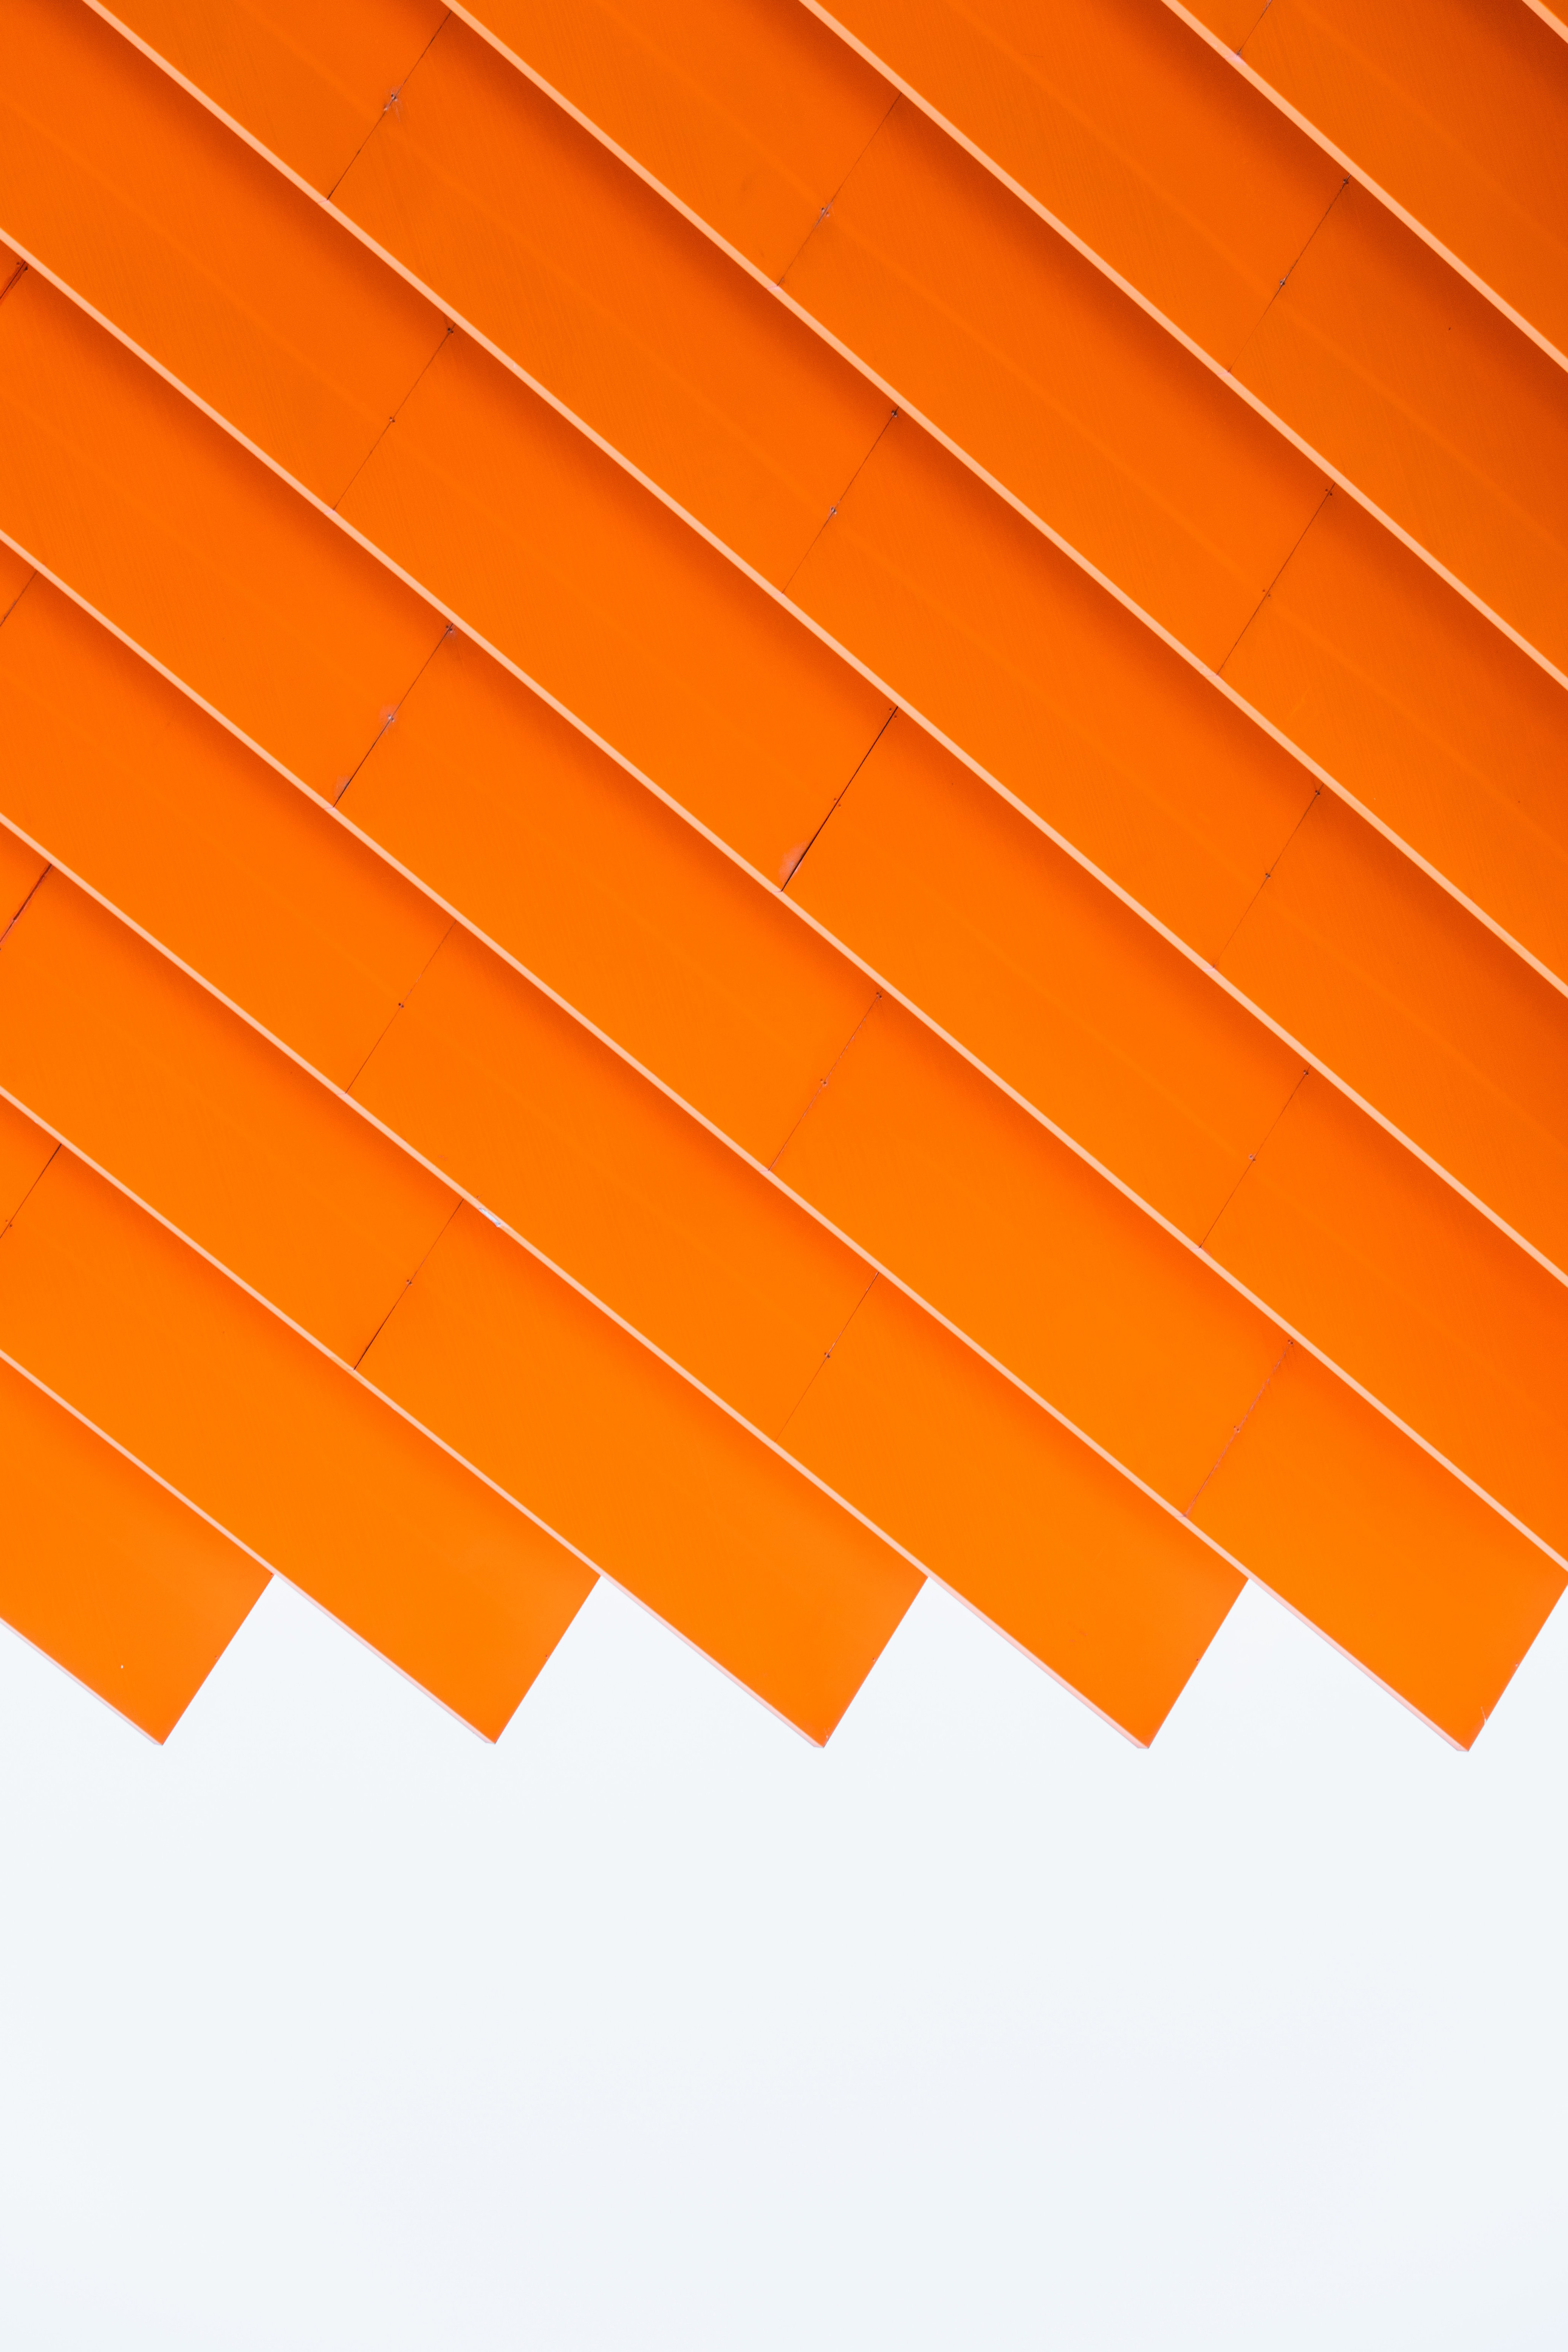 144591 free download Orange wallpapers for phone,  Orange images and screensavers for mobile